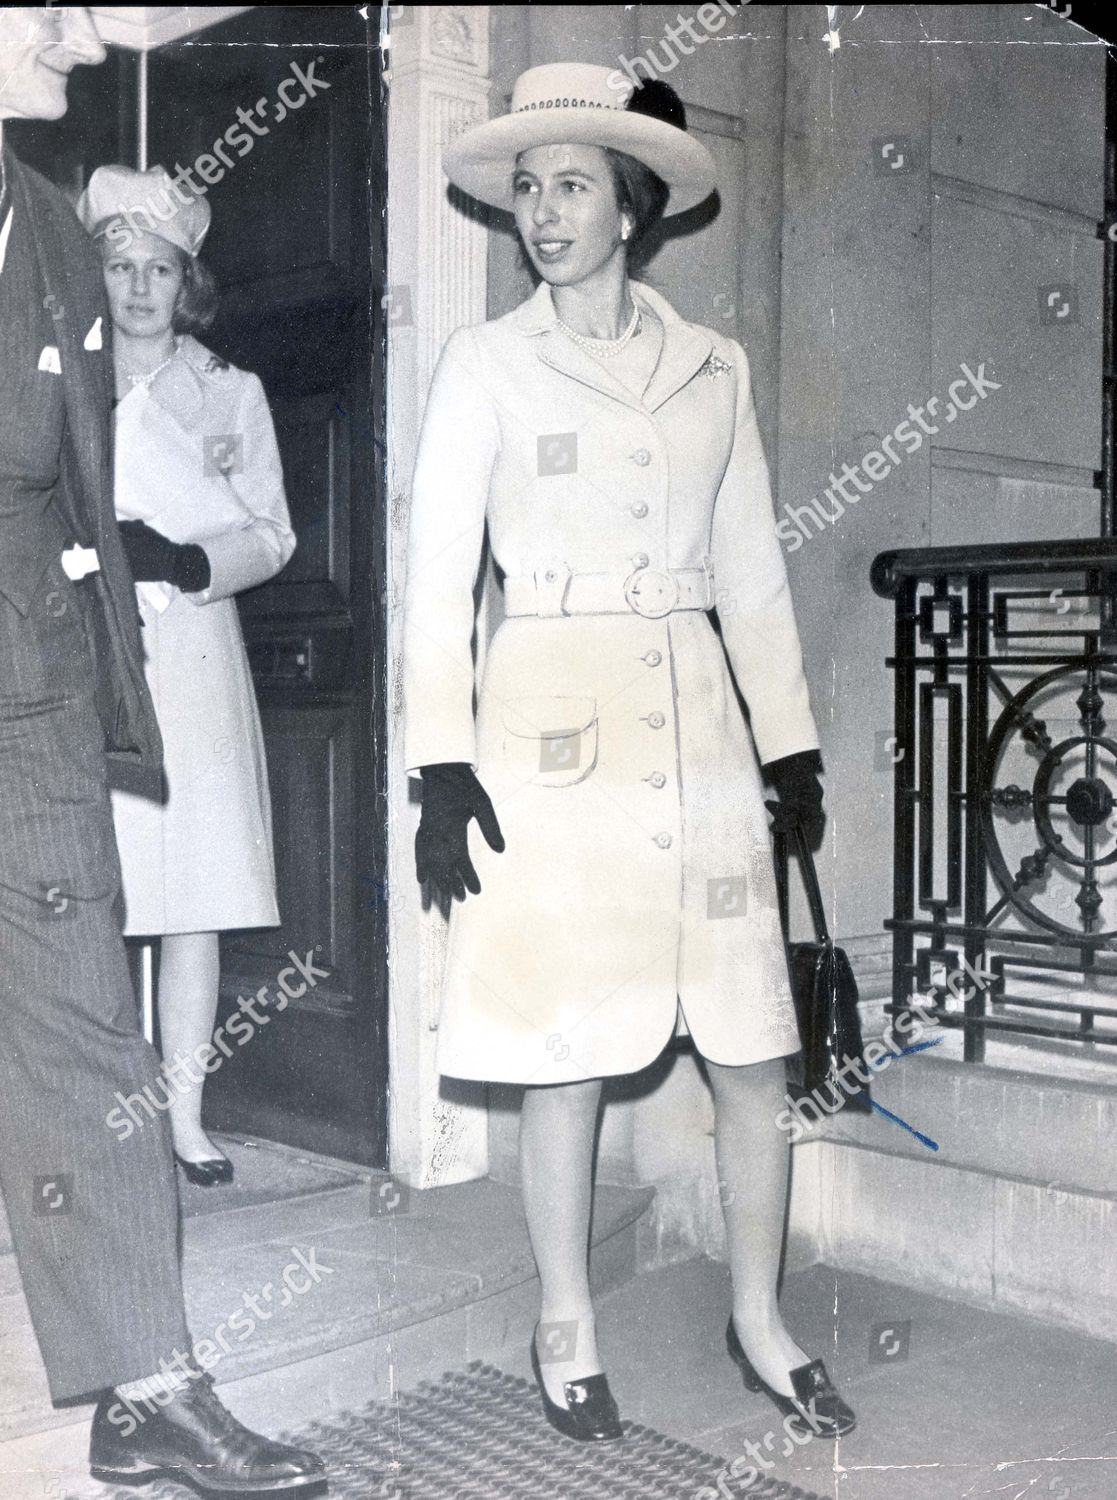 princess-anne-now-princess-royal-1971-picture-shows-princess-anne-arrives-at-saddlers-hall-cheapside-when-she-became-a-yeoman-of-the-master-saddlers-company-shutterstock-editorial-896317a.jpg